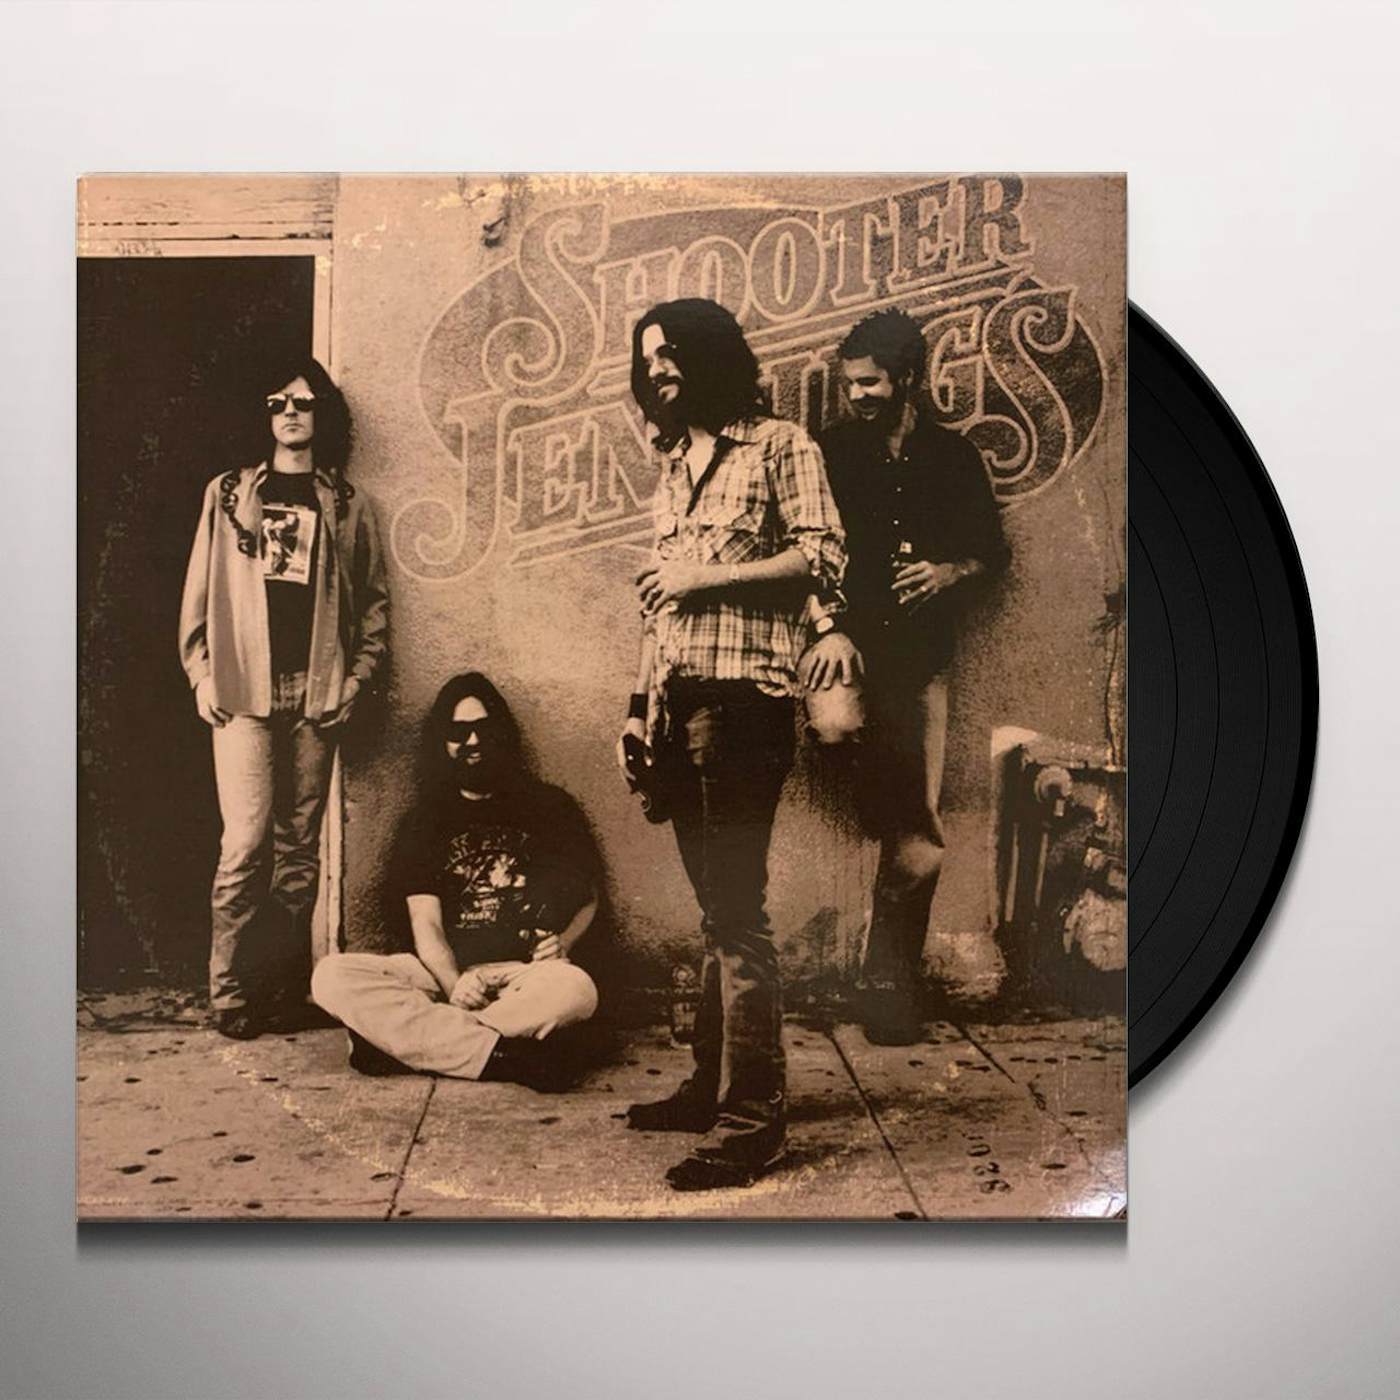 Shooter Jennings Put The O Back In Country Vinyl Record